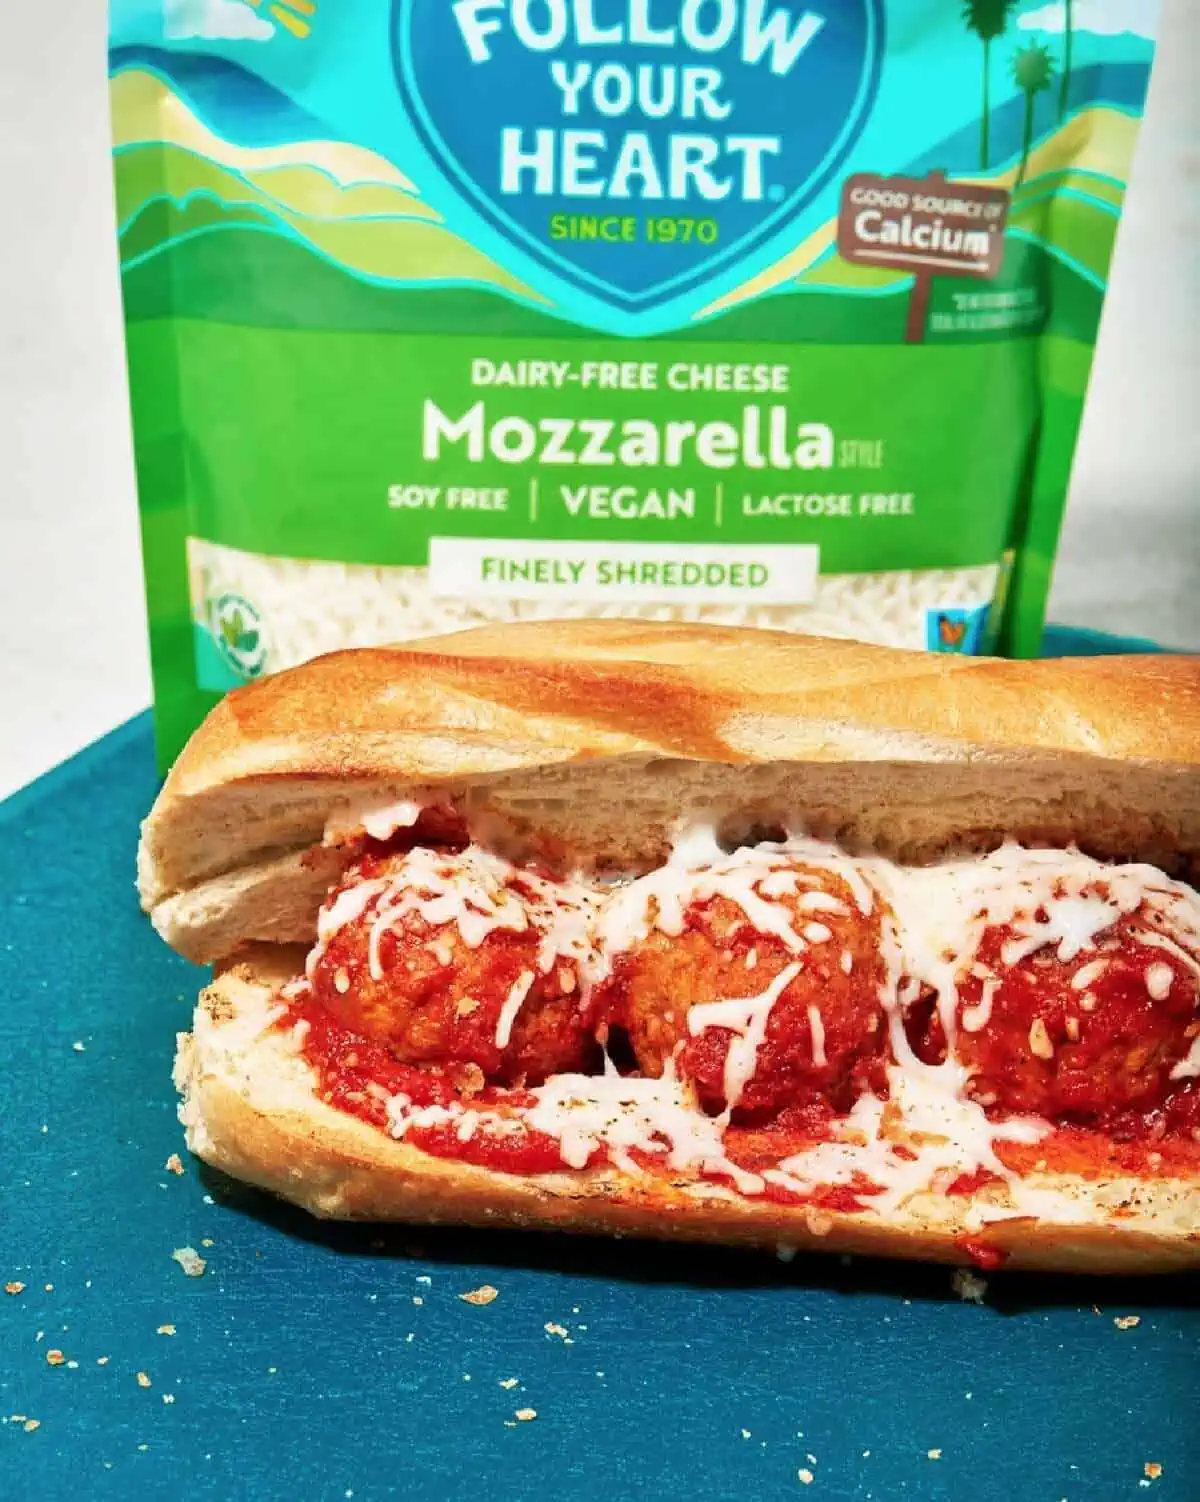 A green and blue pouch of Follow Your Heart mozzarella cheese and a vegan meatball sub on a blue countertop. 